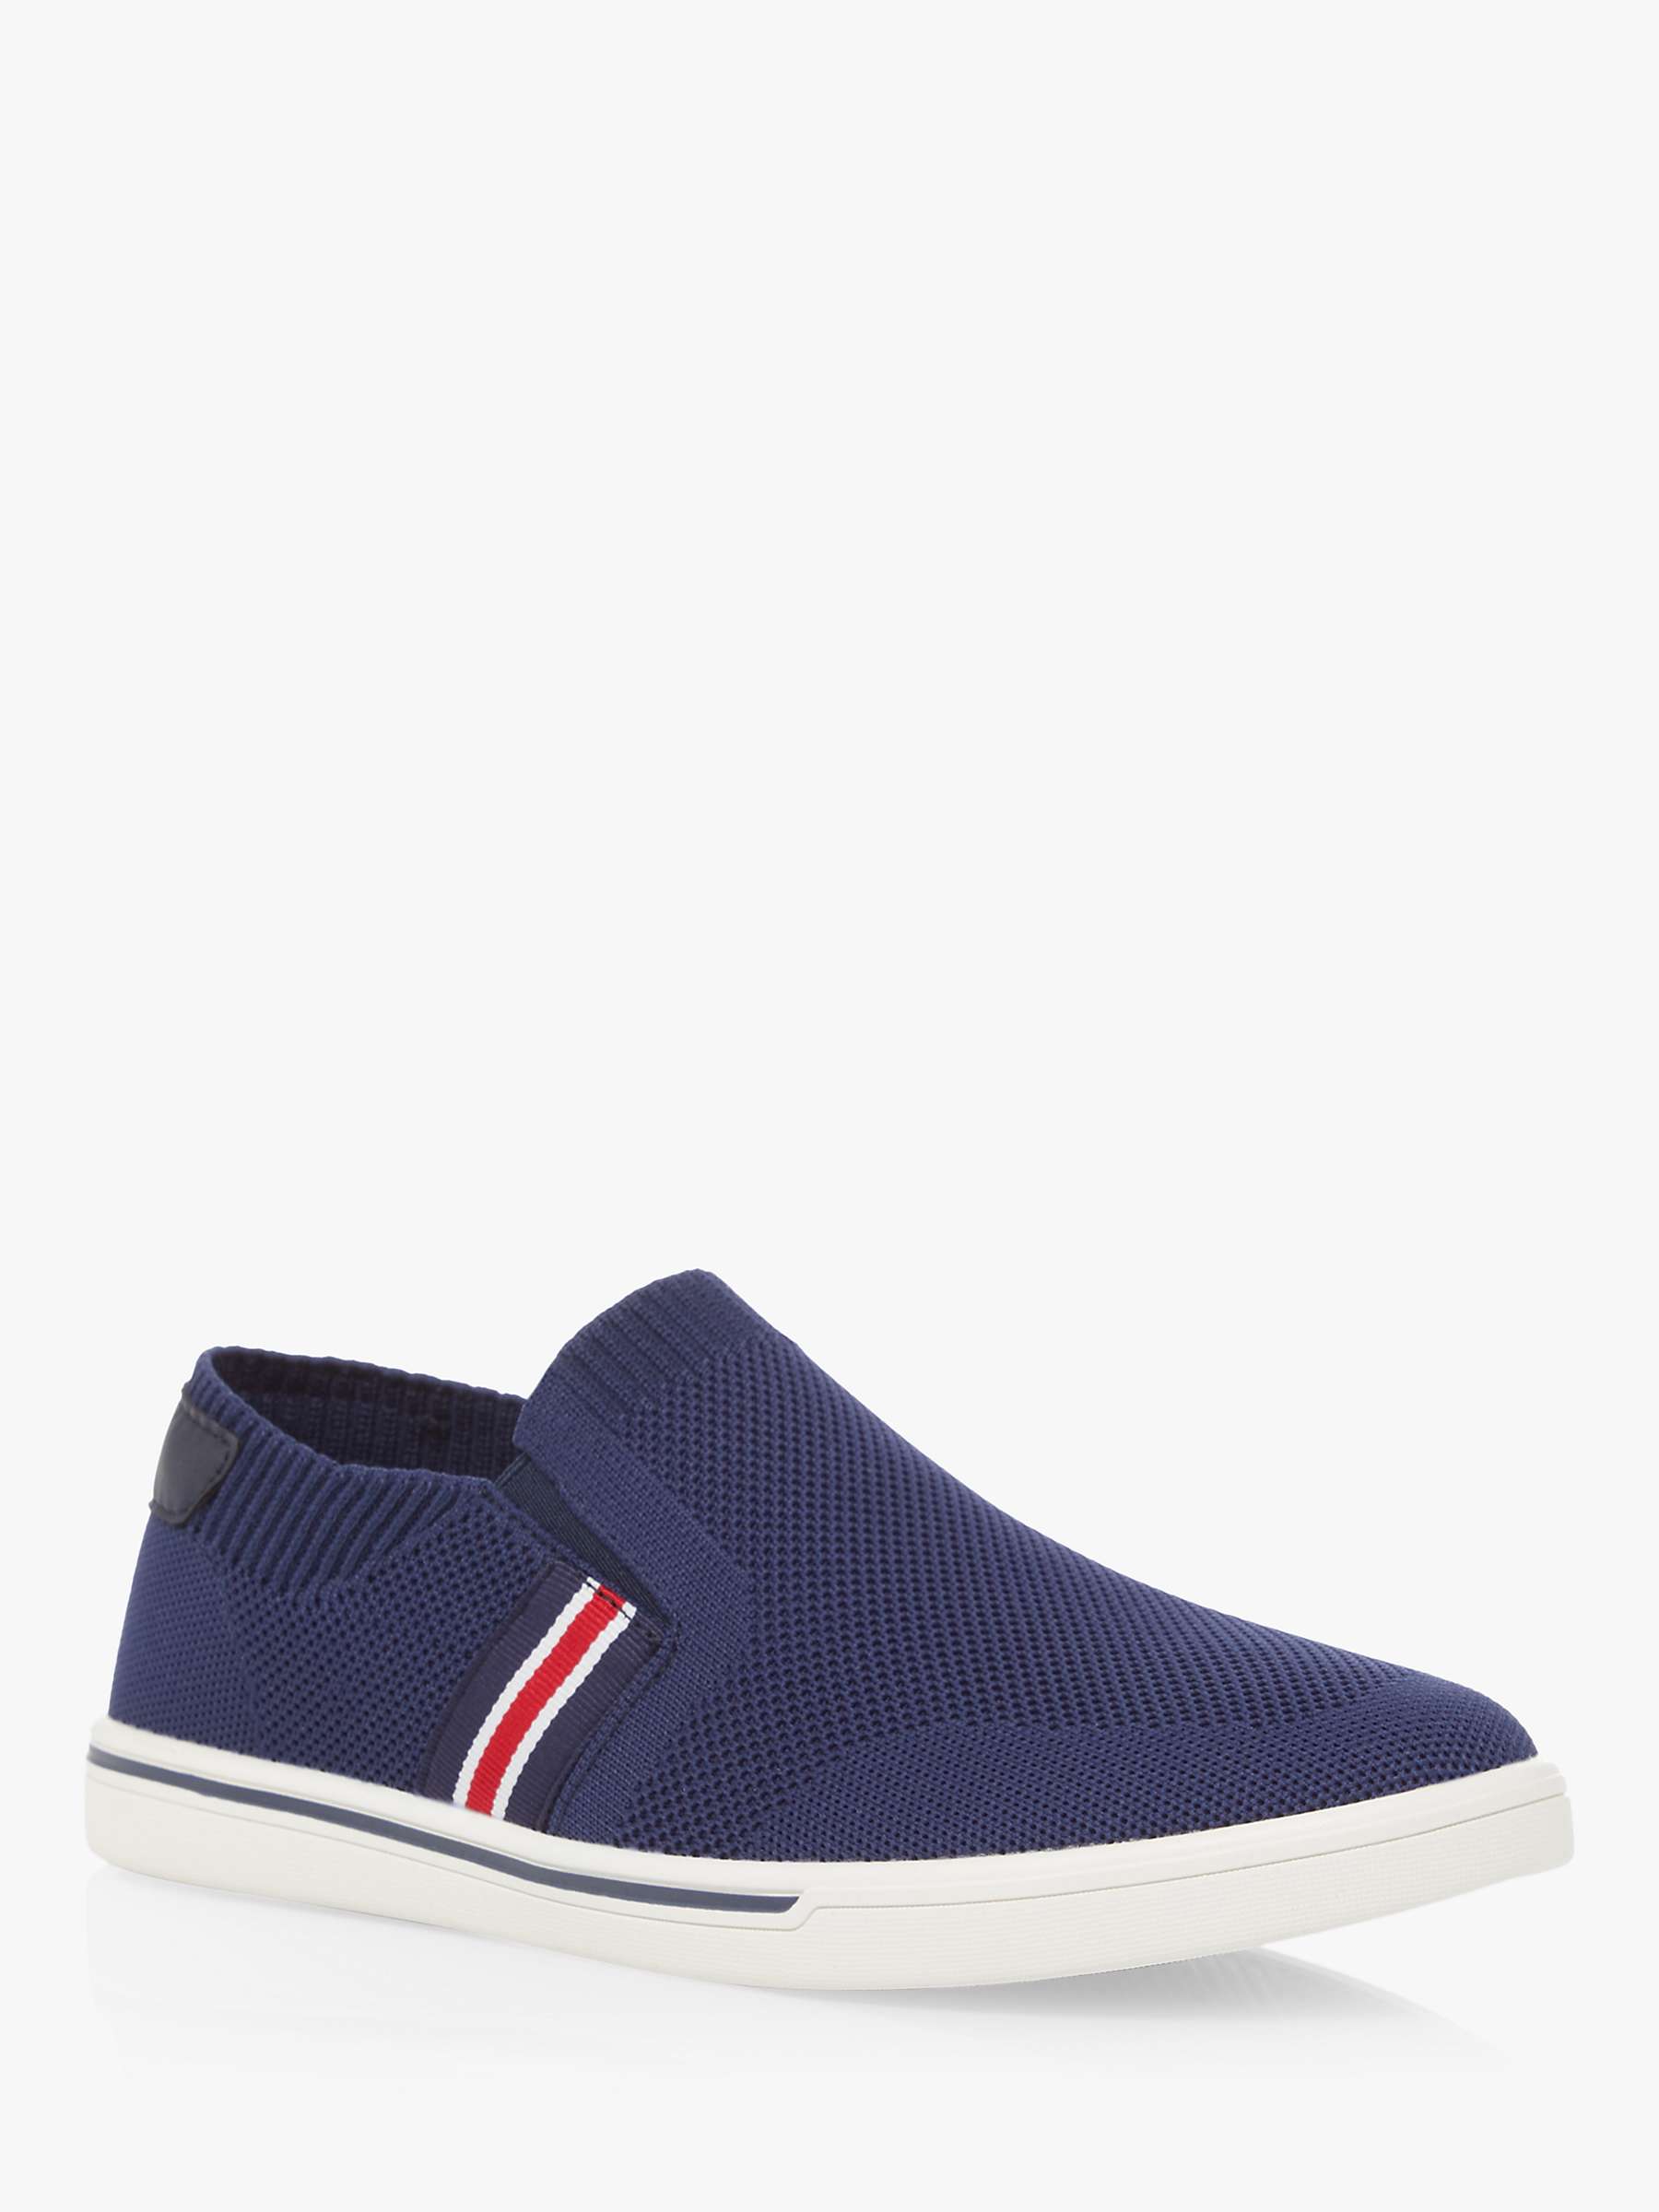 Buy Dune Tycoon Slip On Trainers Online at johnlewis.com